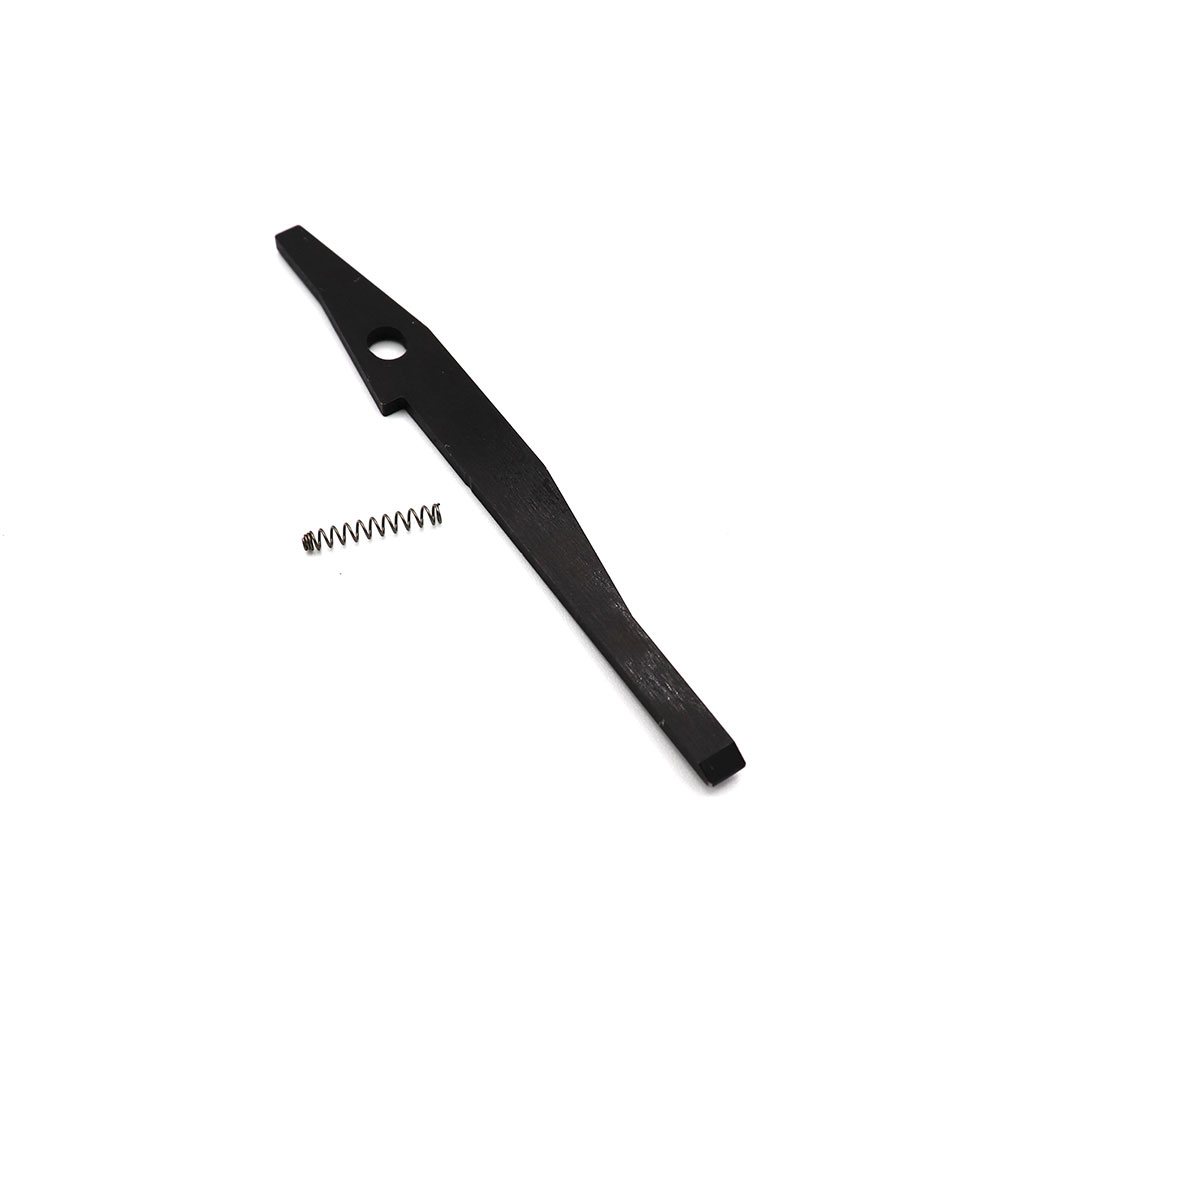 KIDD INNOVATIVE DESIGN - FIRING PIN AND SPRING REPLACEMENT FOR RUGER 10/22